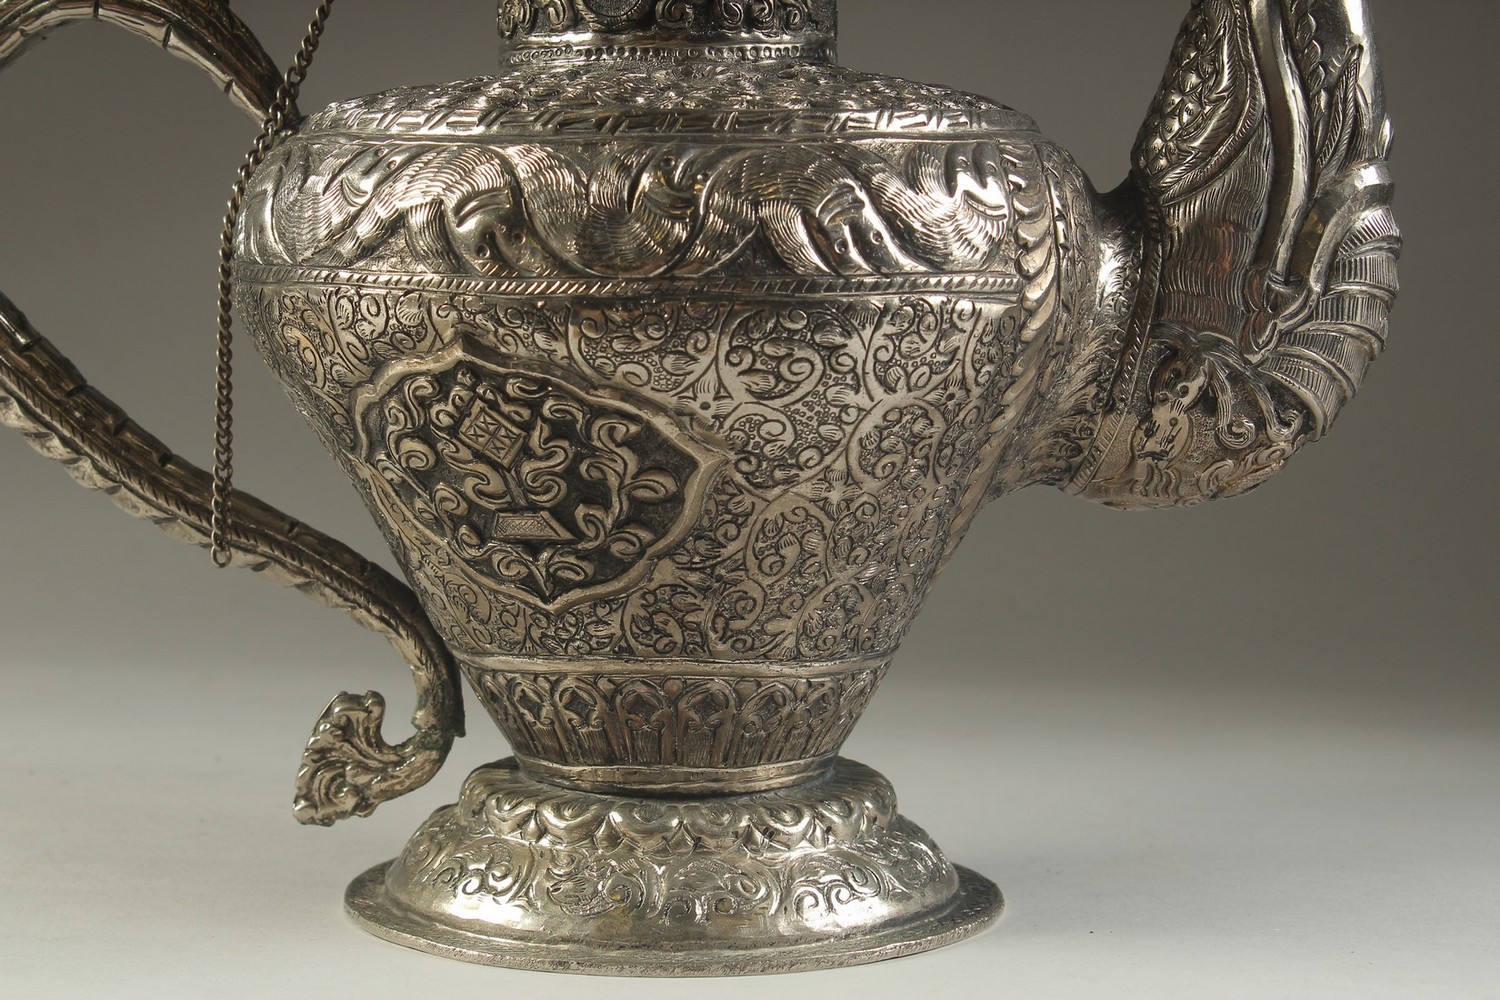 A LARGE CHINESE EMBOSSED AND ENGRAVED WHITE METAL LIDDED JUG, possibly low grade silver, decorated - Image 11 of 14